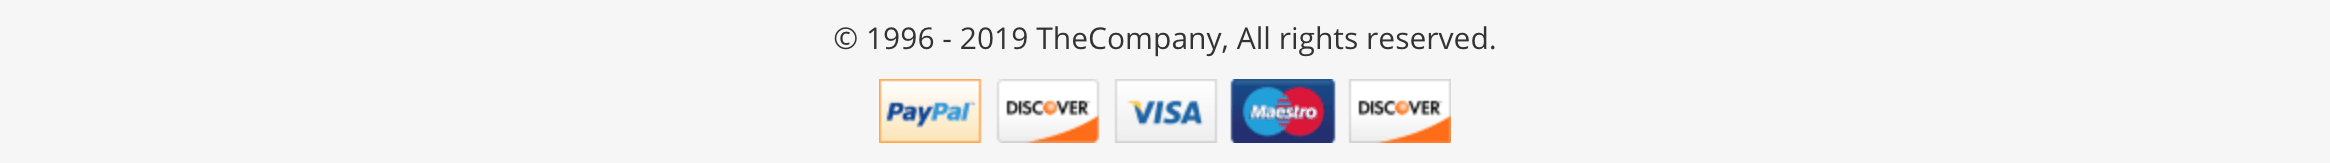 Copyright and Payment Icons